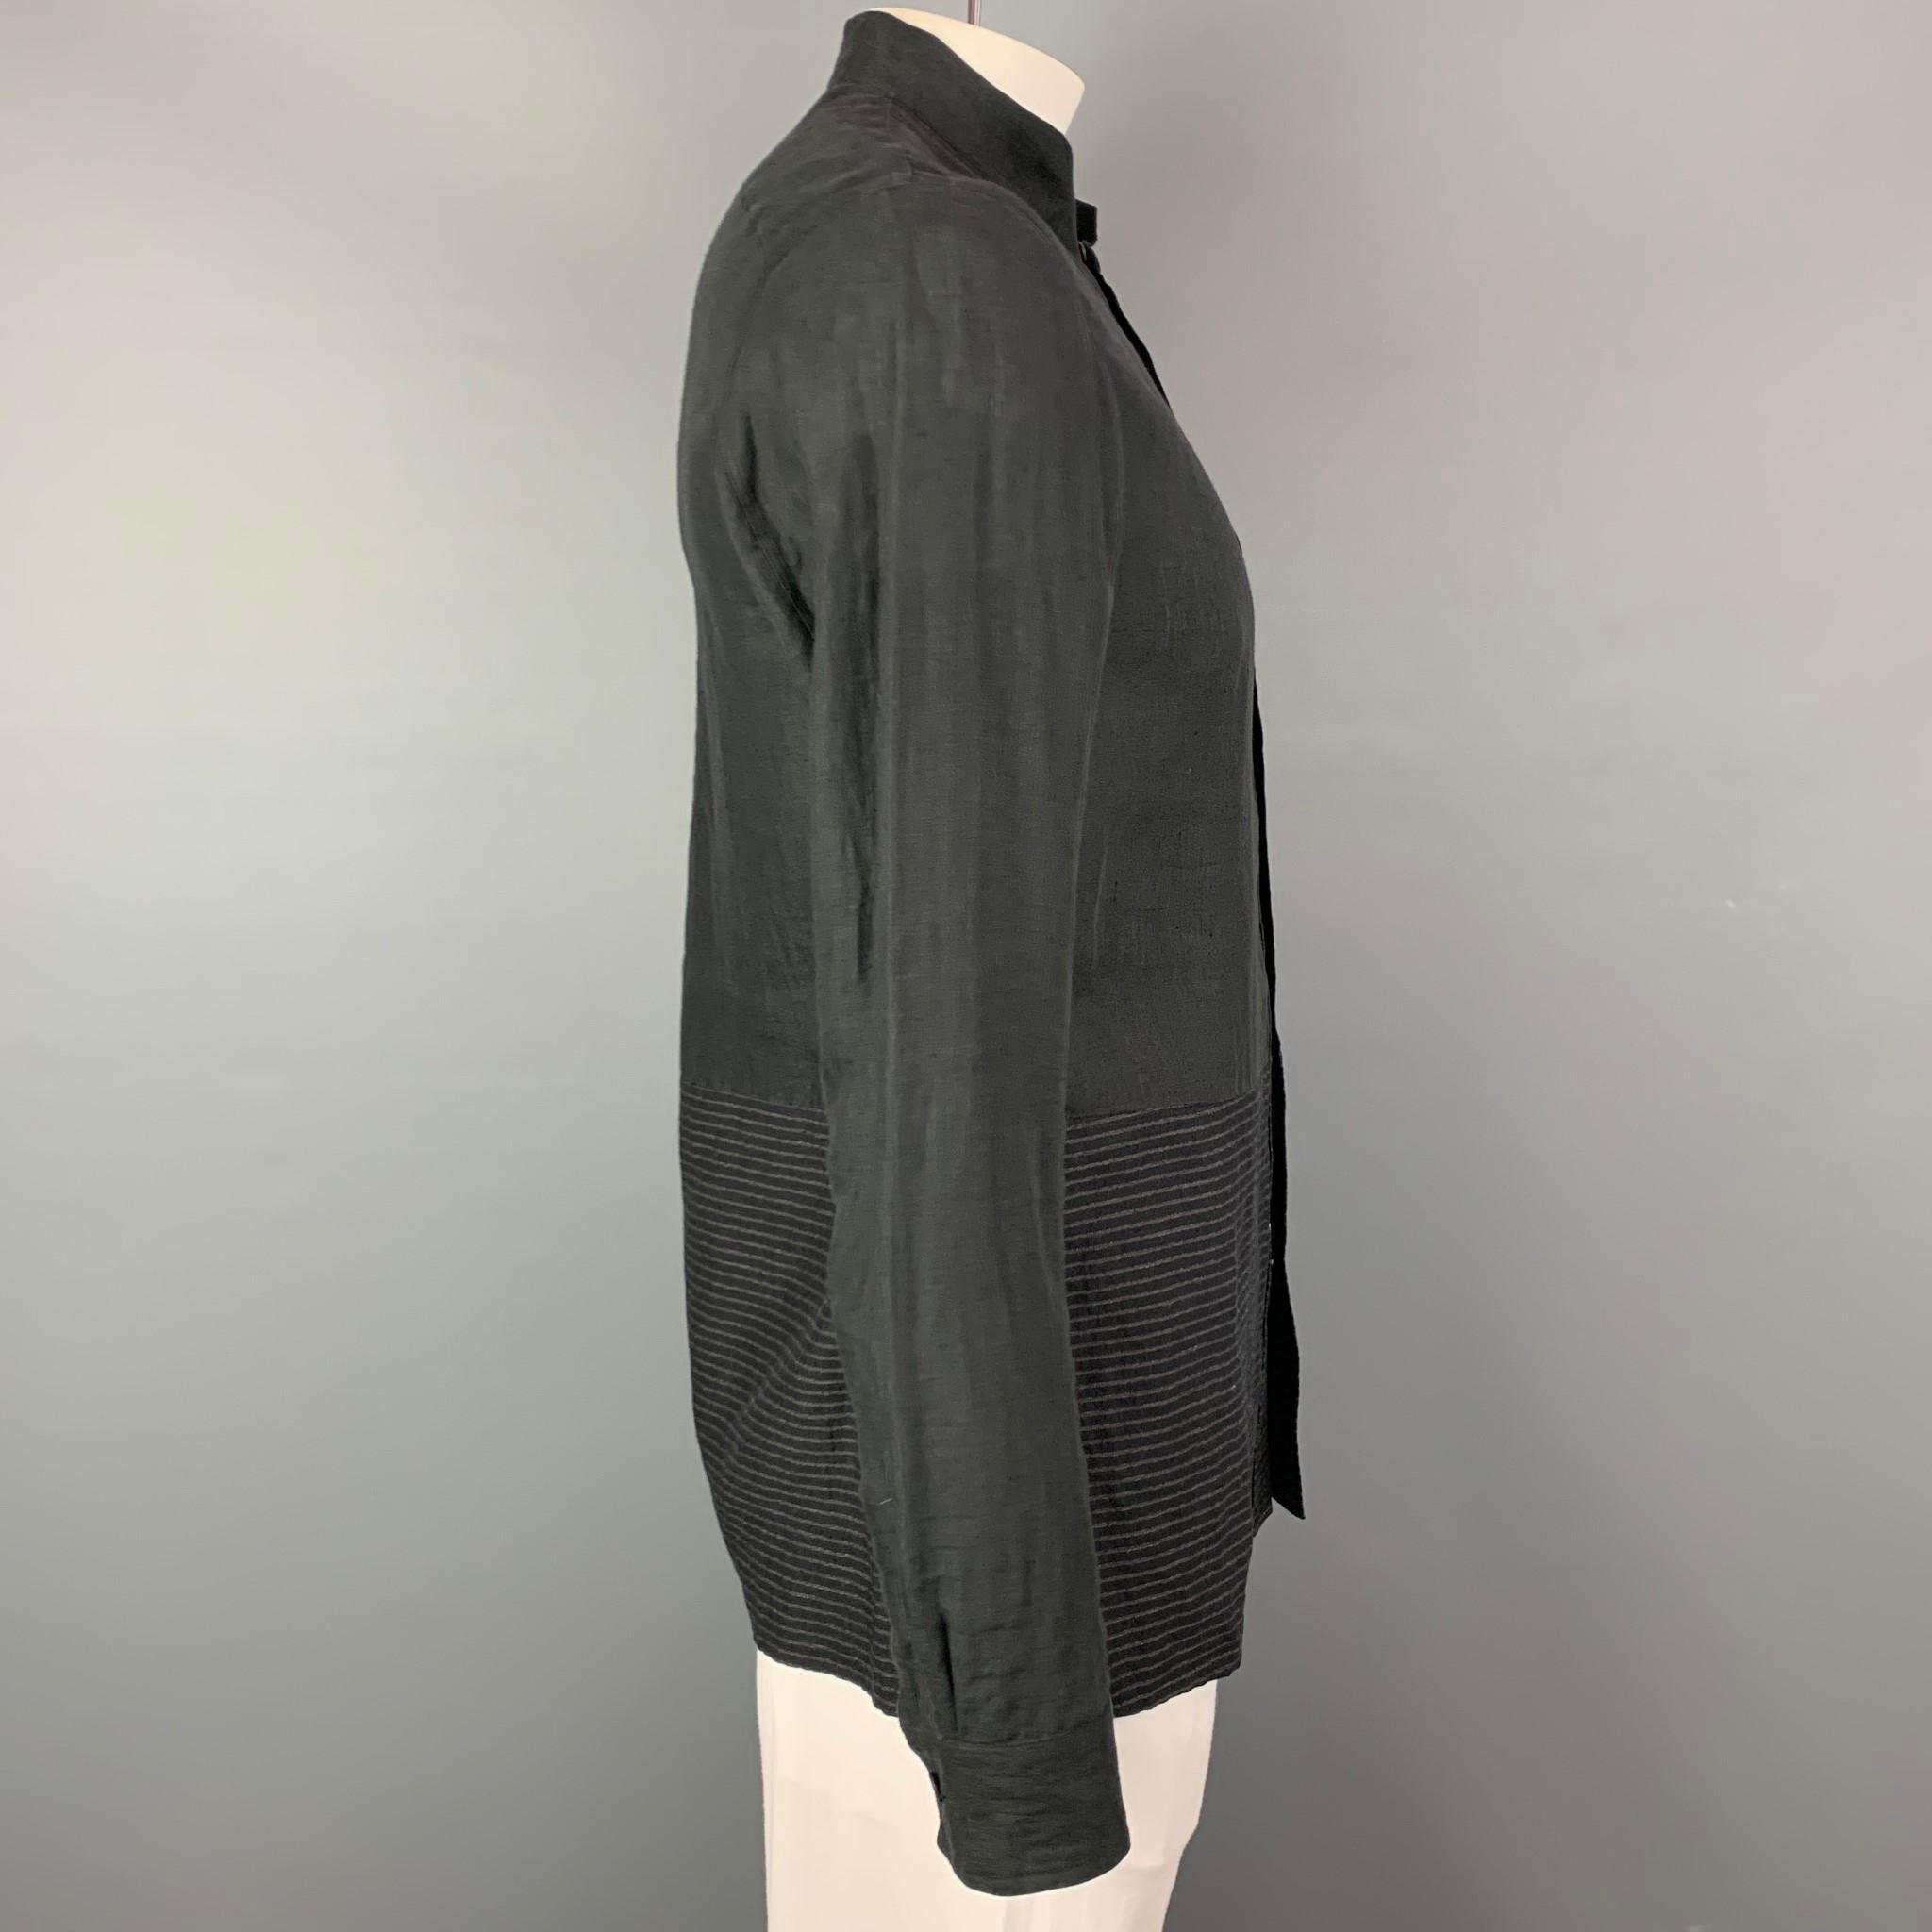 ZIGGY CHEN S/S 15 long sleeve shirt come sin a slate cotton / linen with a striped bottom trim featuring a band collar, front pocket, and a buttoned closure. 

Very Good Pre-Owned Condition.
Marked: 46
Original Retail Price: